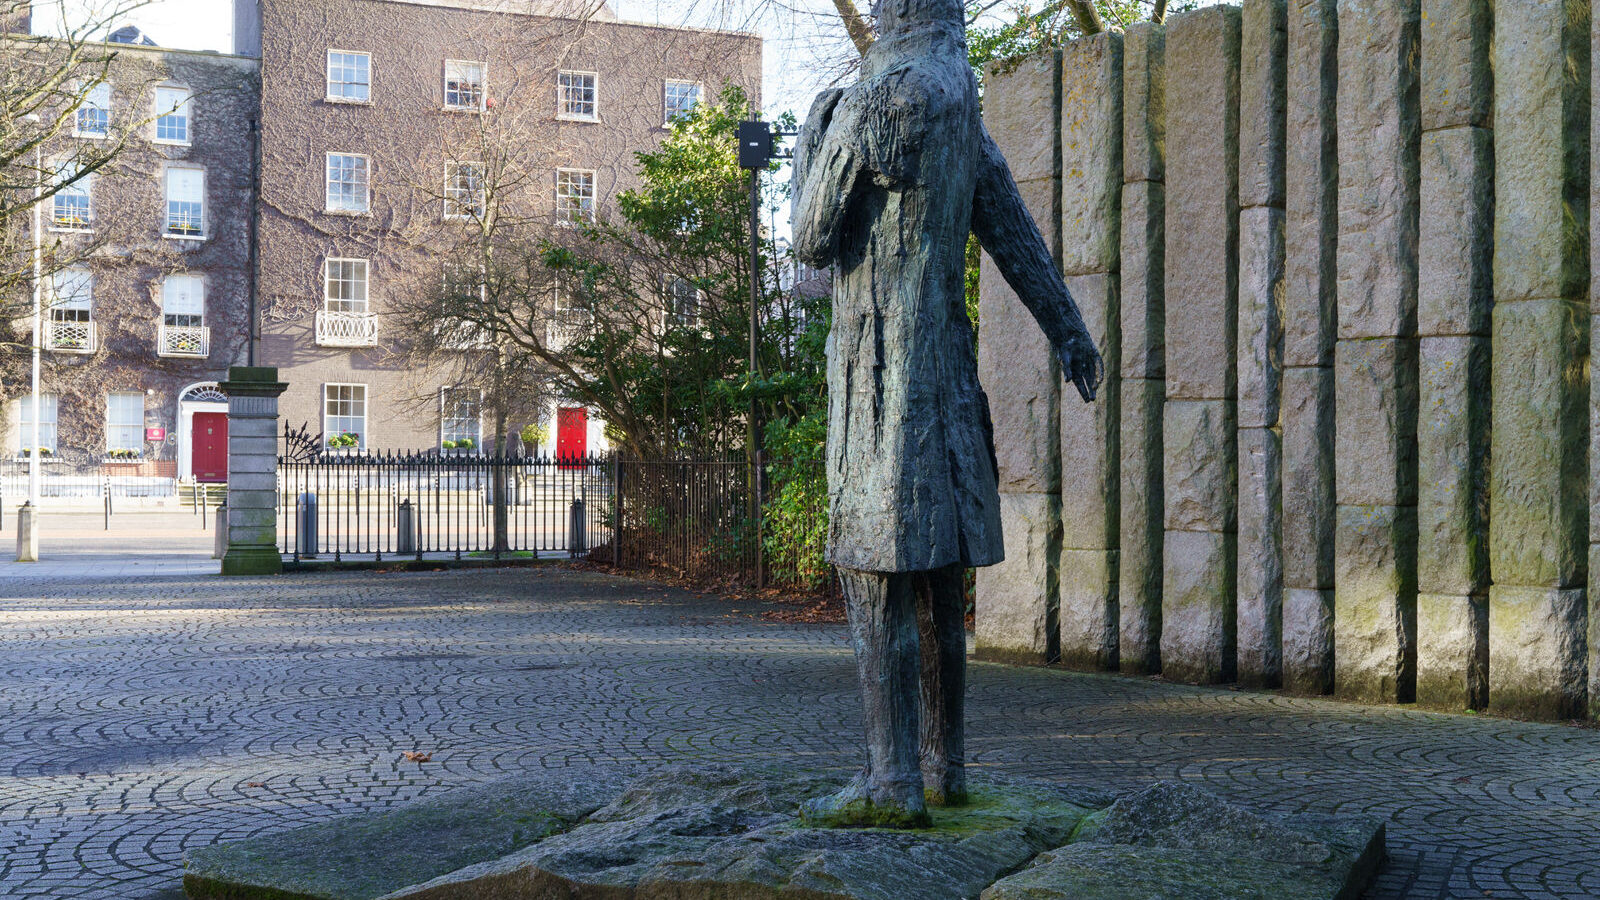 WOLFE TONE BY EDWARD DELANEY [I LIKE THE SETTING AT THE CORNER OF STEPHEN'S GREEN]-228106-1